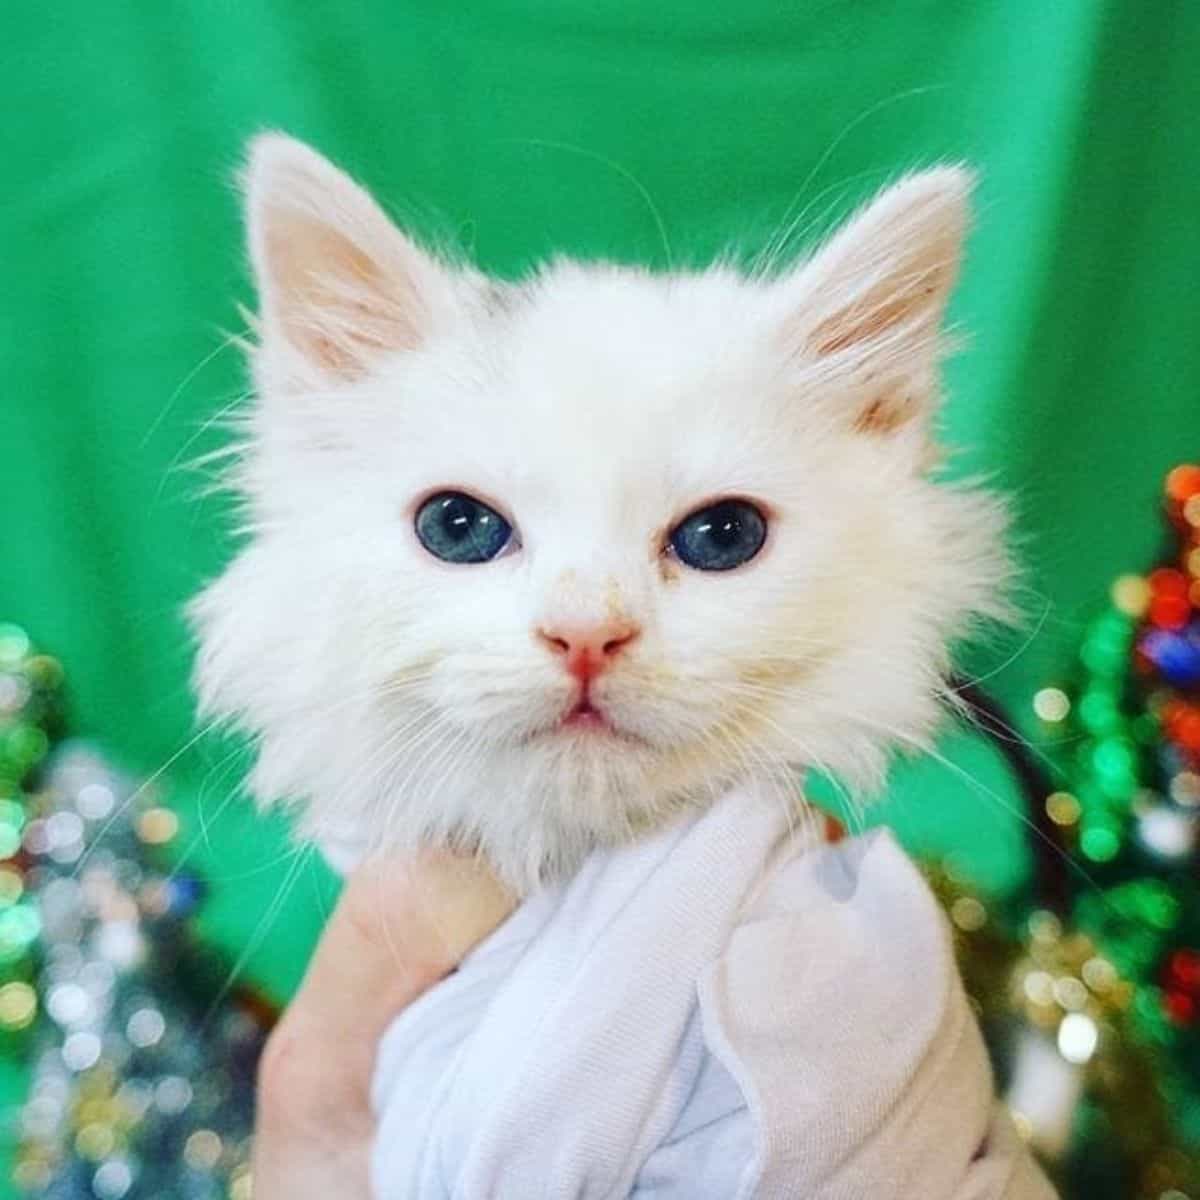 close-up photo of a white kitten